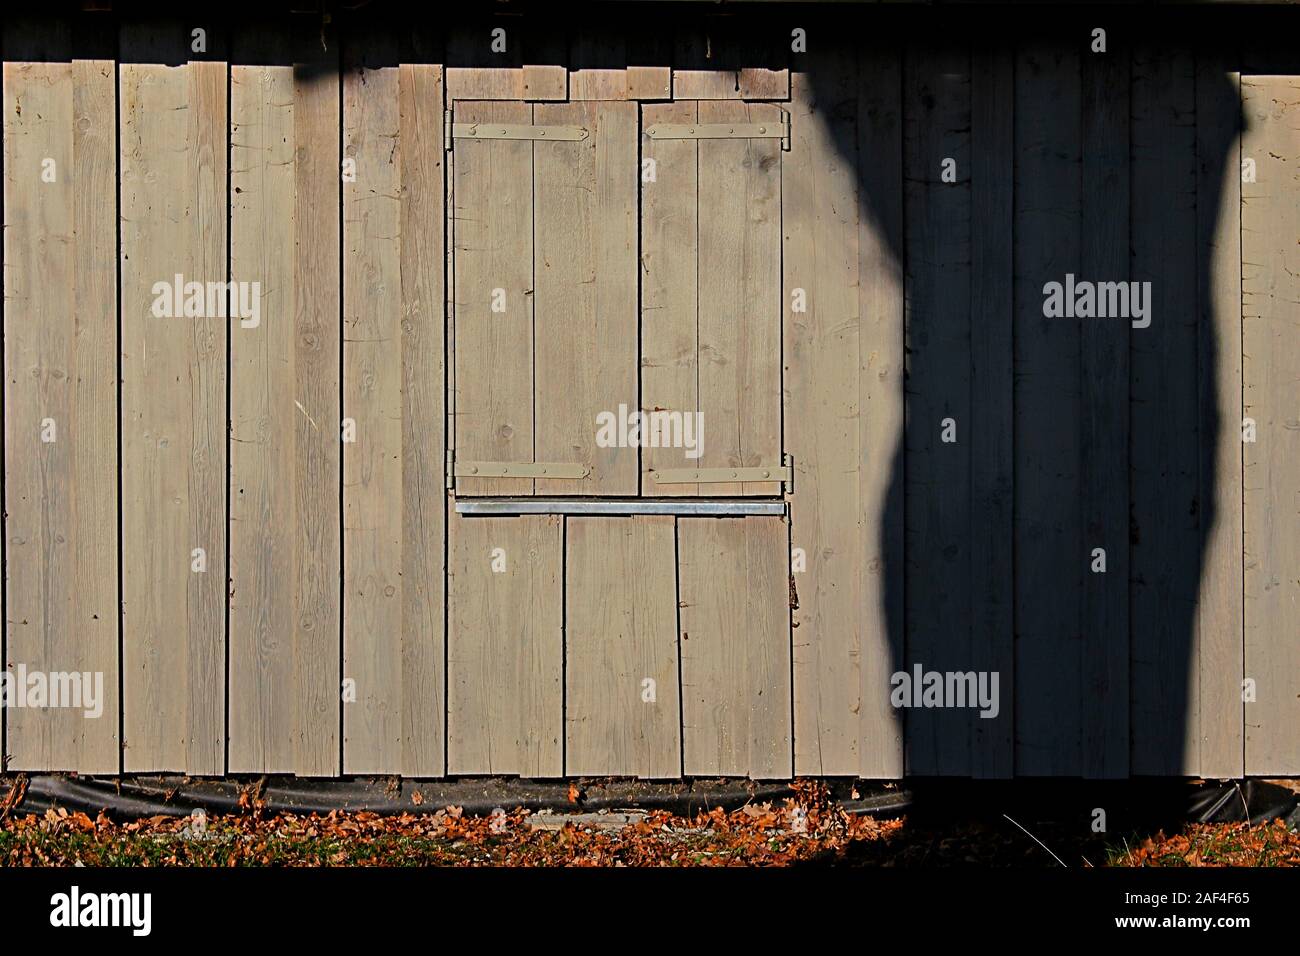 Dark shadow being cast on wooden wall of a old shed with closed shutters Stock Photo